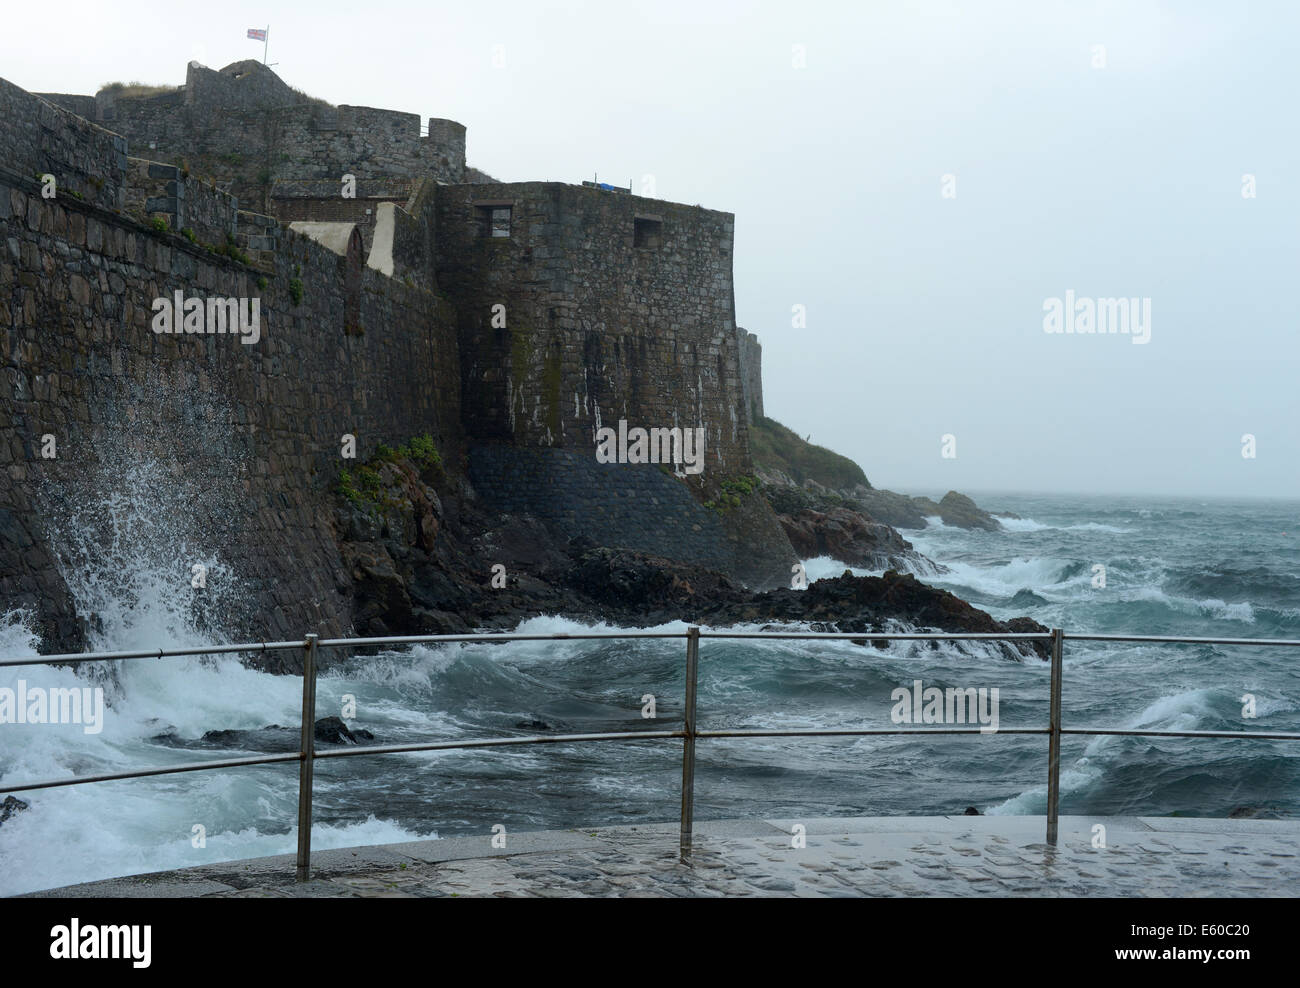 St Peter Port, Guernsey, Channel Islands. 10th August 2014. Castle Cornet in St Peter Port, Guernsey is battered by ex Hurricane Bertha as it passes over Guernsey bringing strong winds and heavy rain. It is expected to pass relatively quickly and head North eastwards towards Scotland and the North East. © Robert Smith Stock Photo